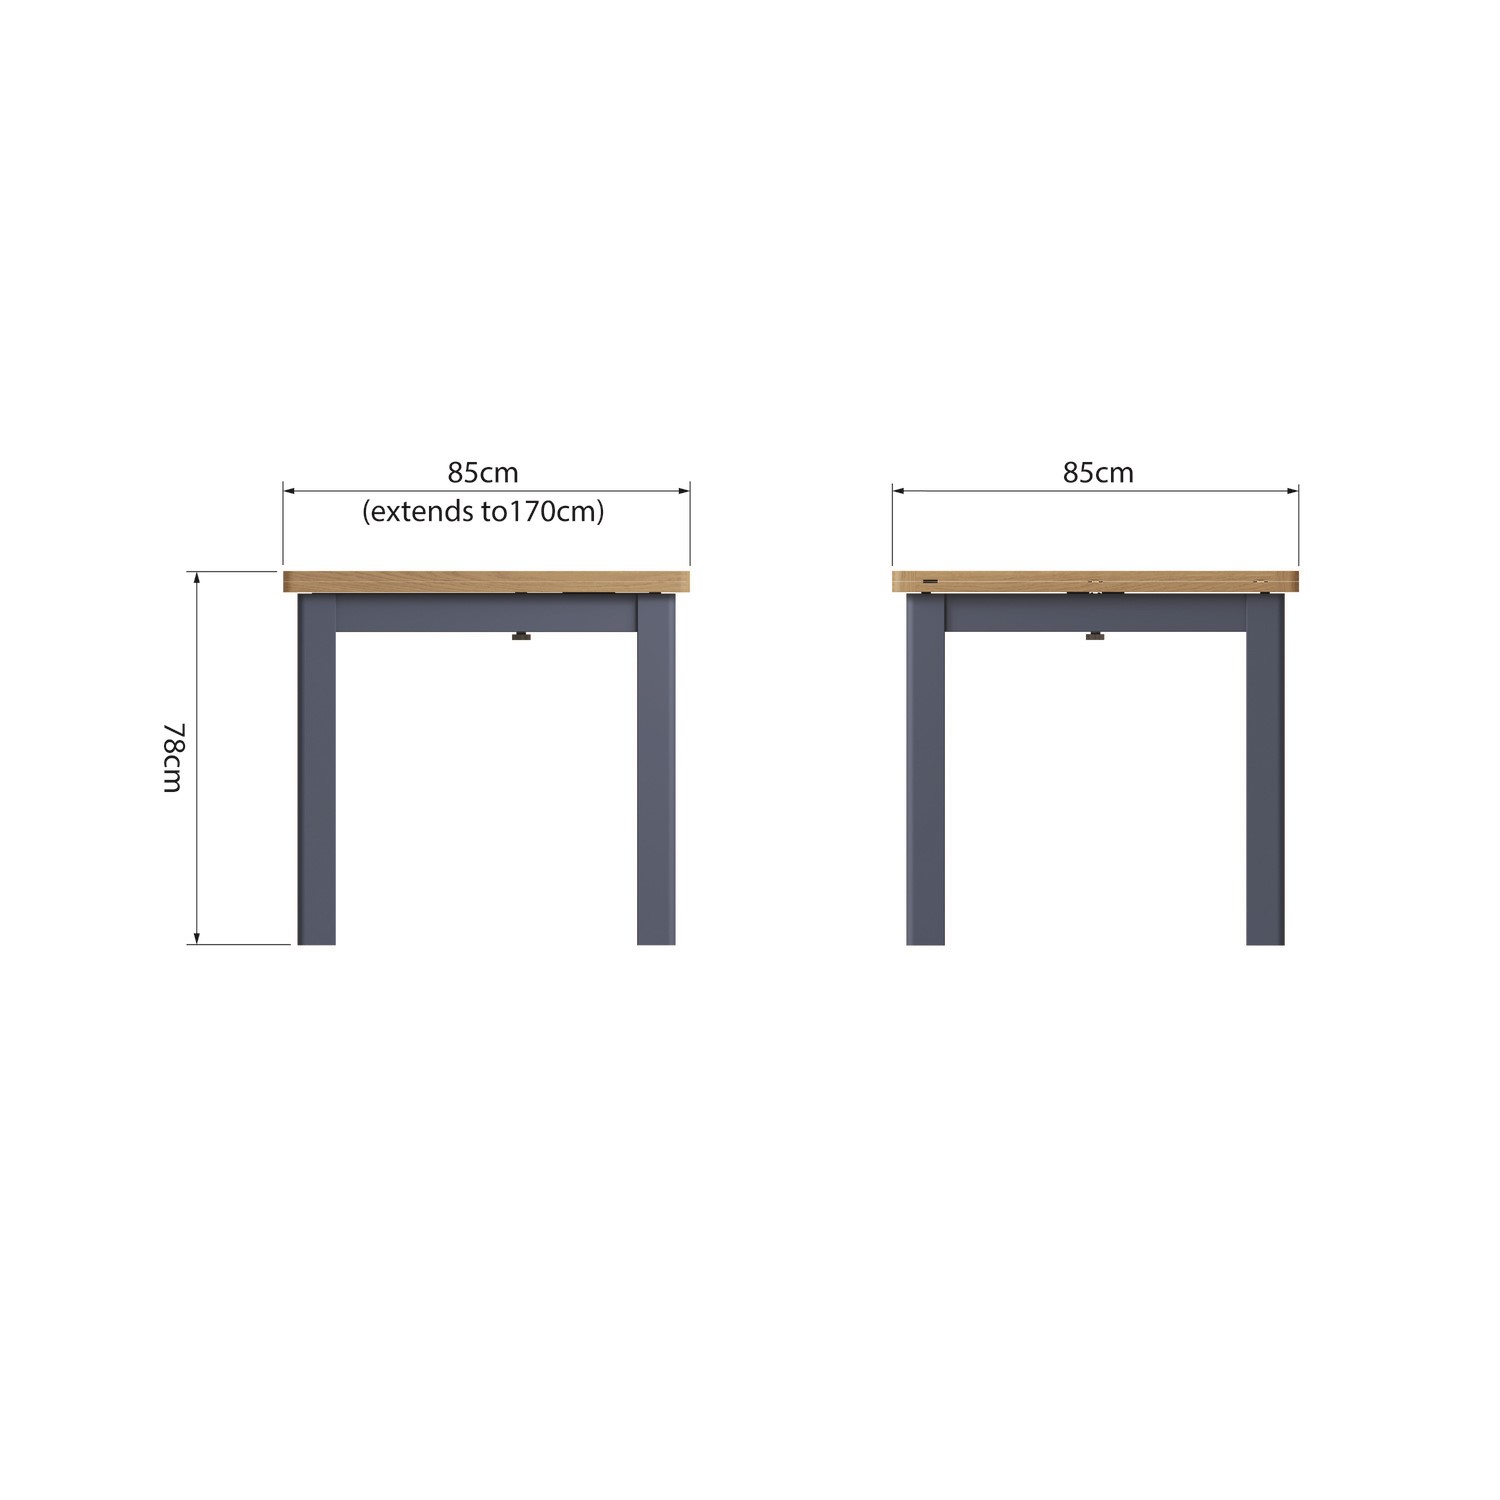 Read more about Navy & oak extendable dining table vriginia